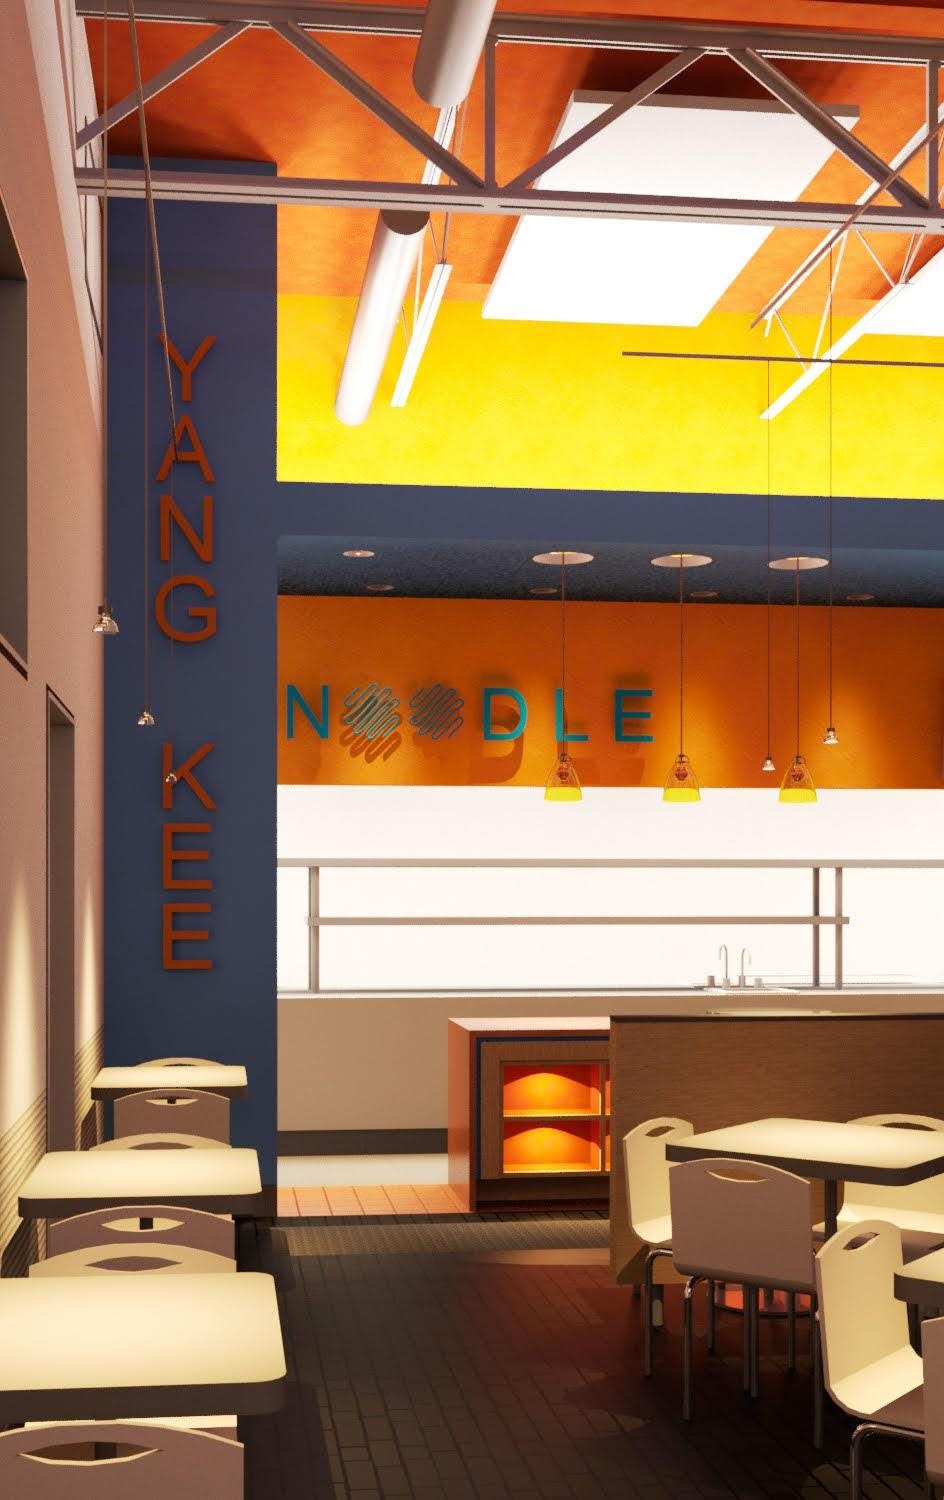 Artist renderings of the newest Yang Kee Noodle location at Middletown Commons. Rendering courtesy of Jon Barker at Design Plus, Inc.